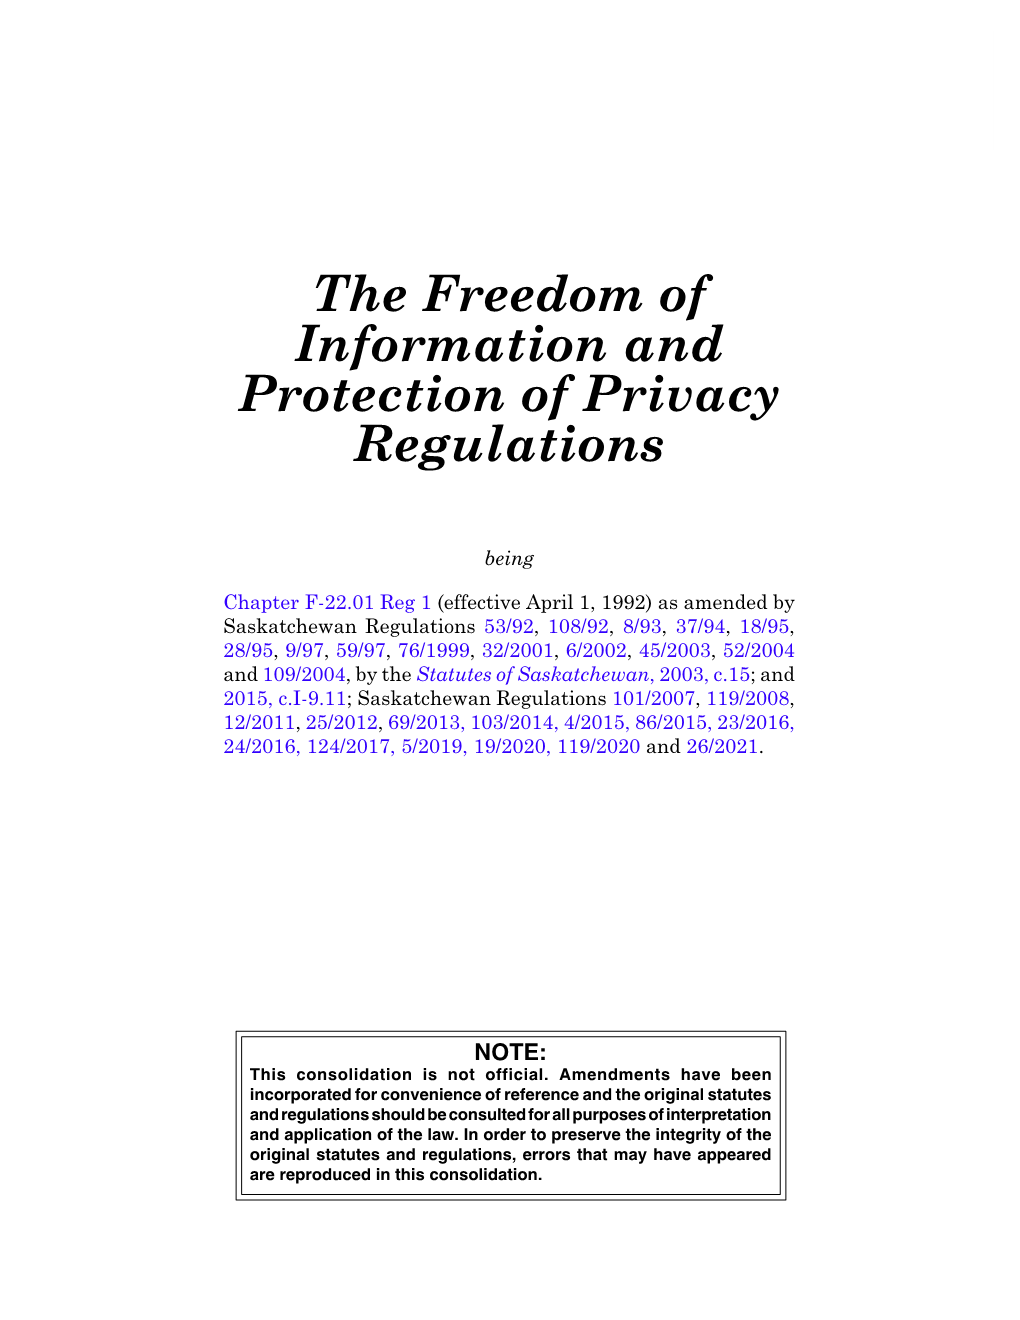 Freedom of Information and Protection of Privacy Regulations, F-22.01